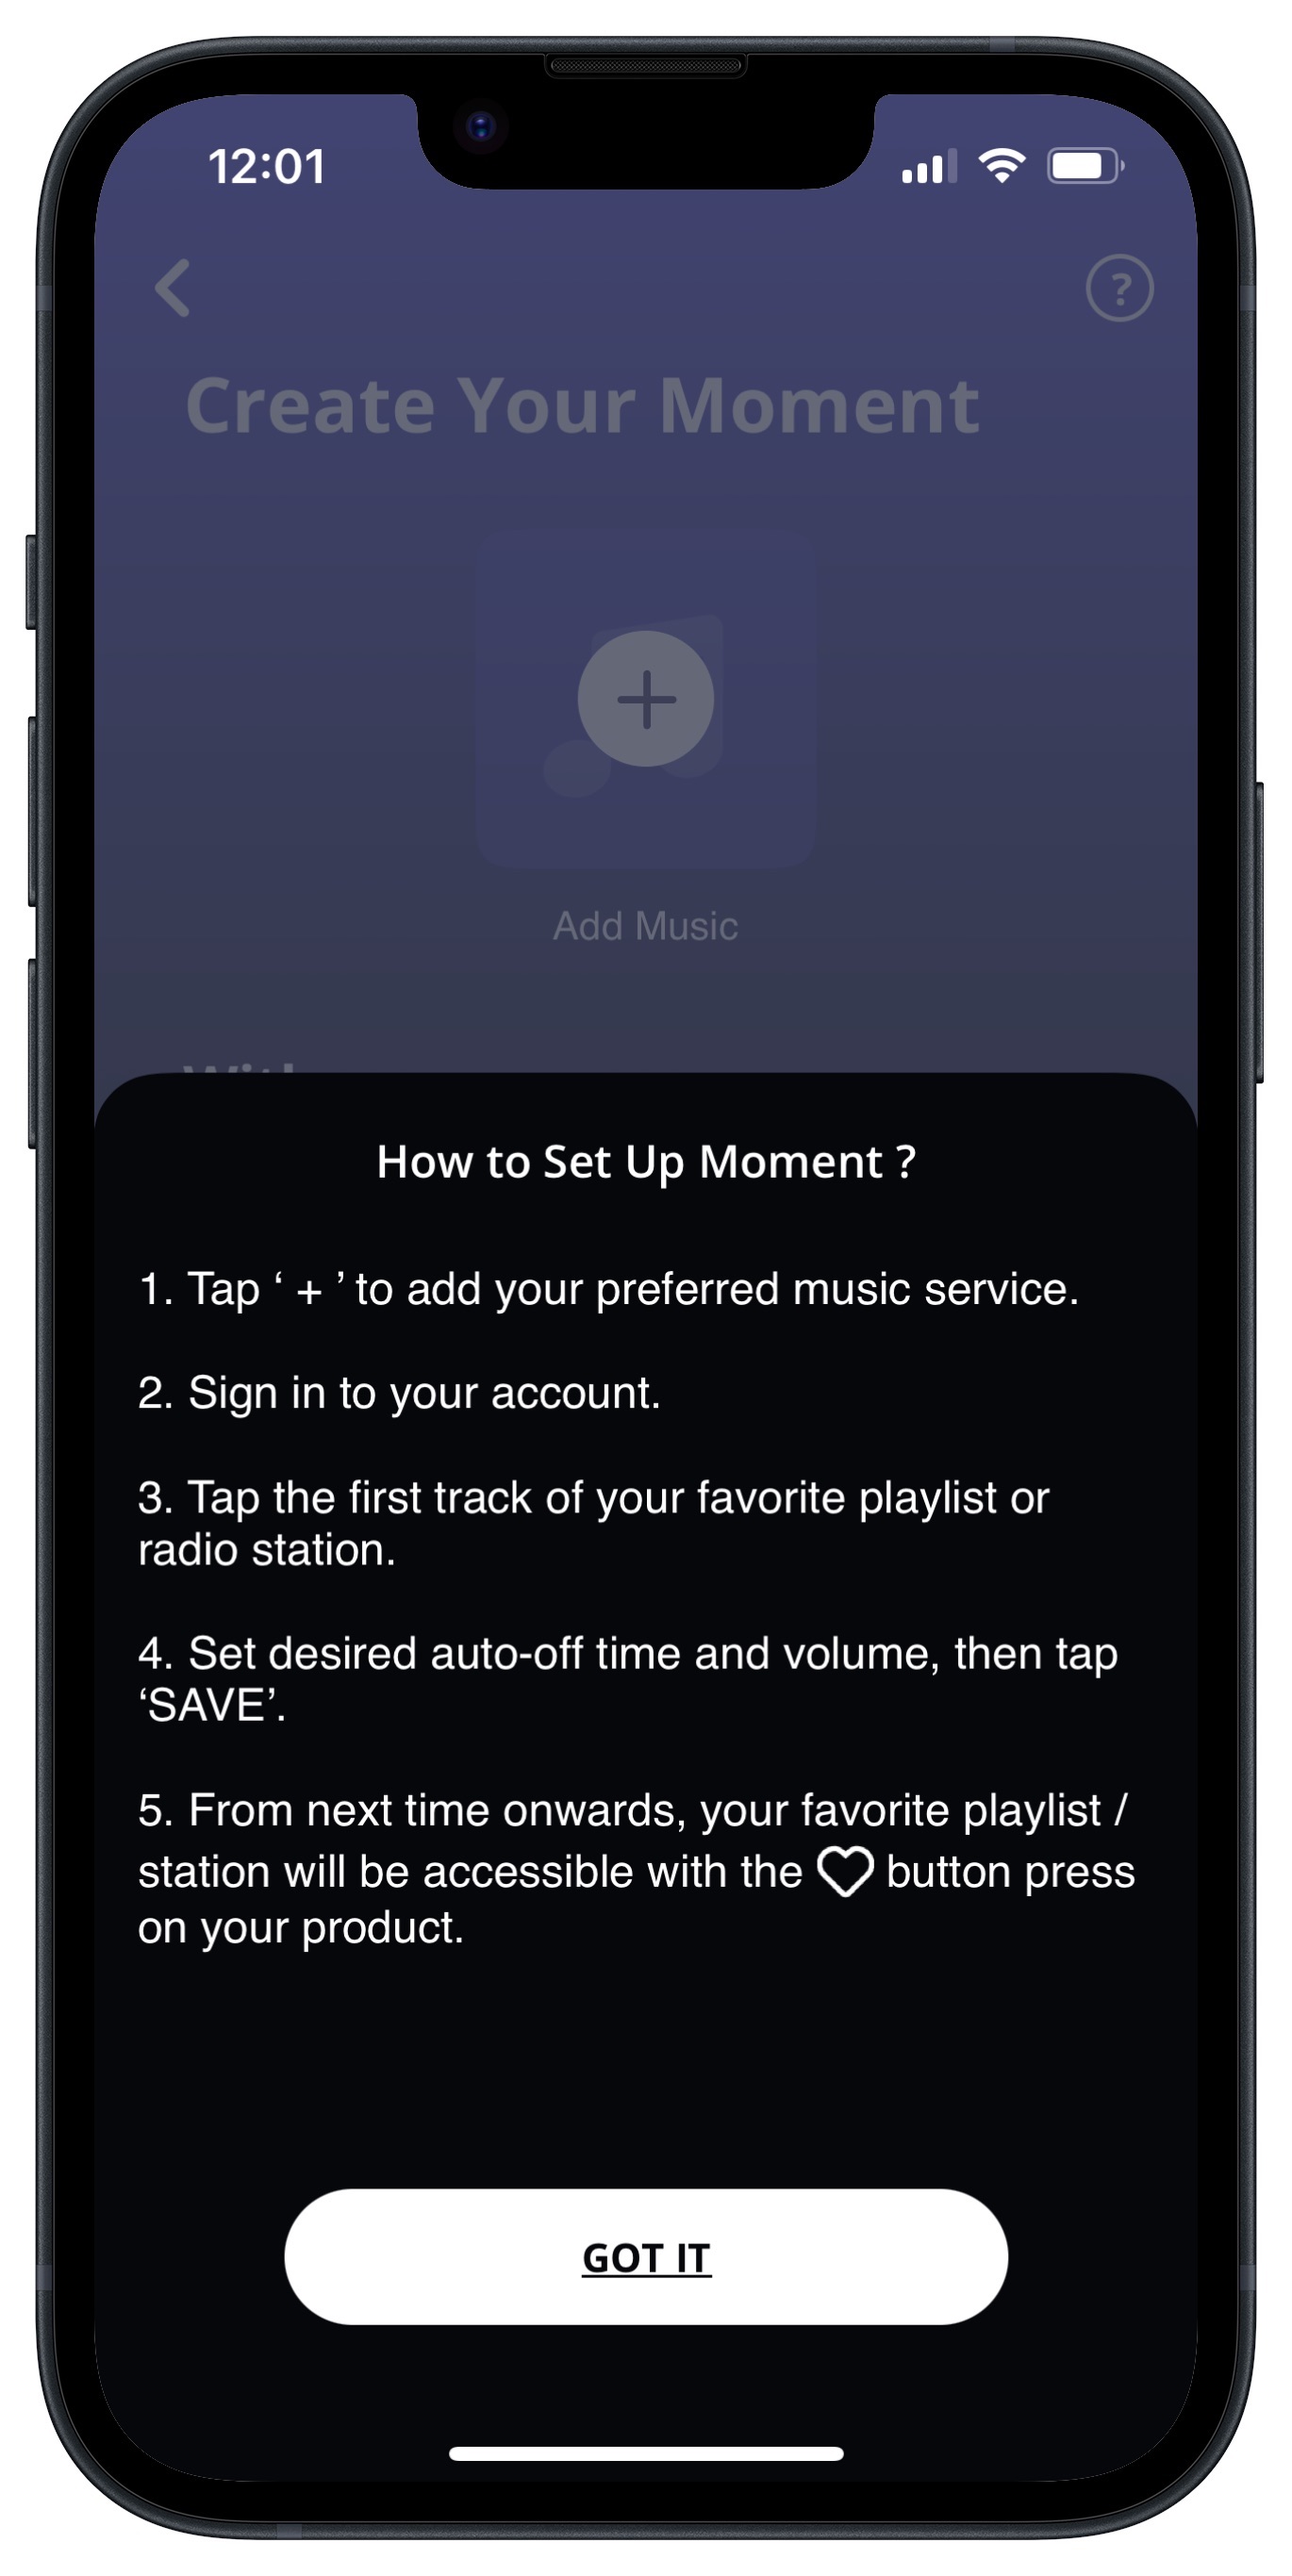 JBL One app for iOS Moments instructions.